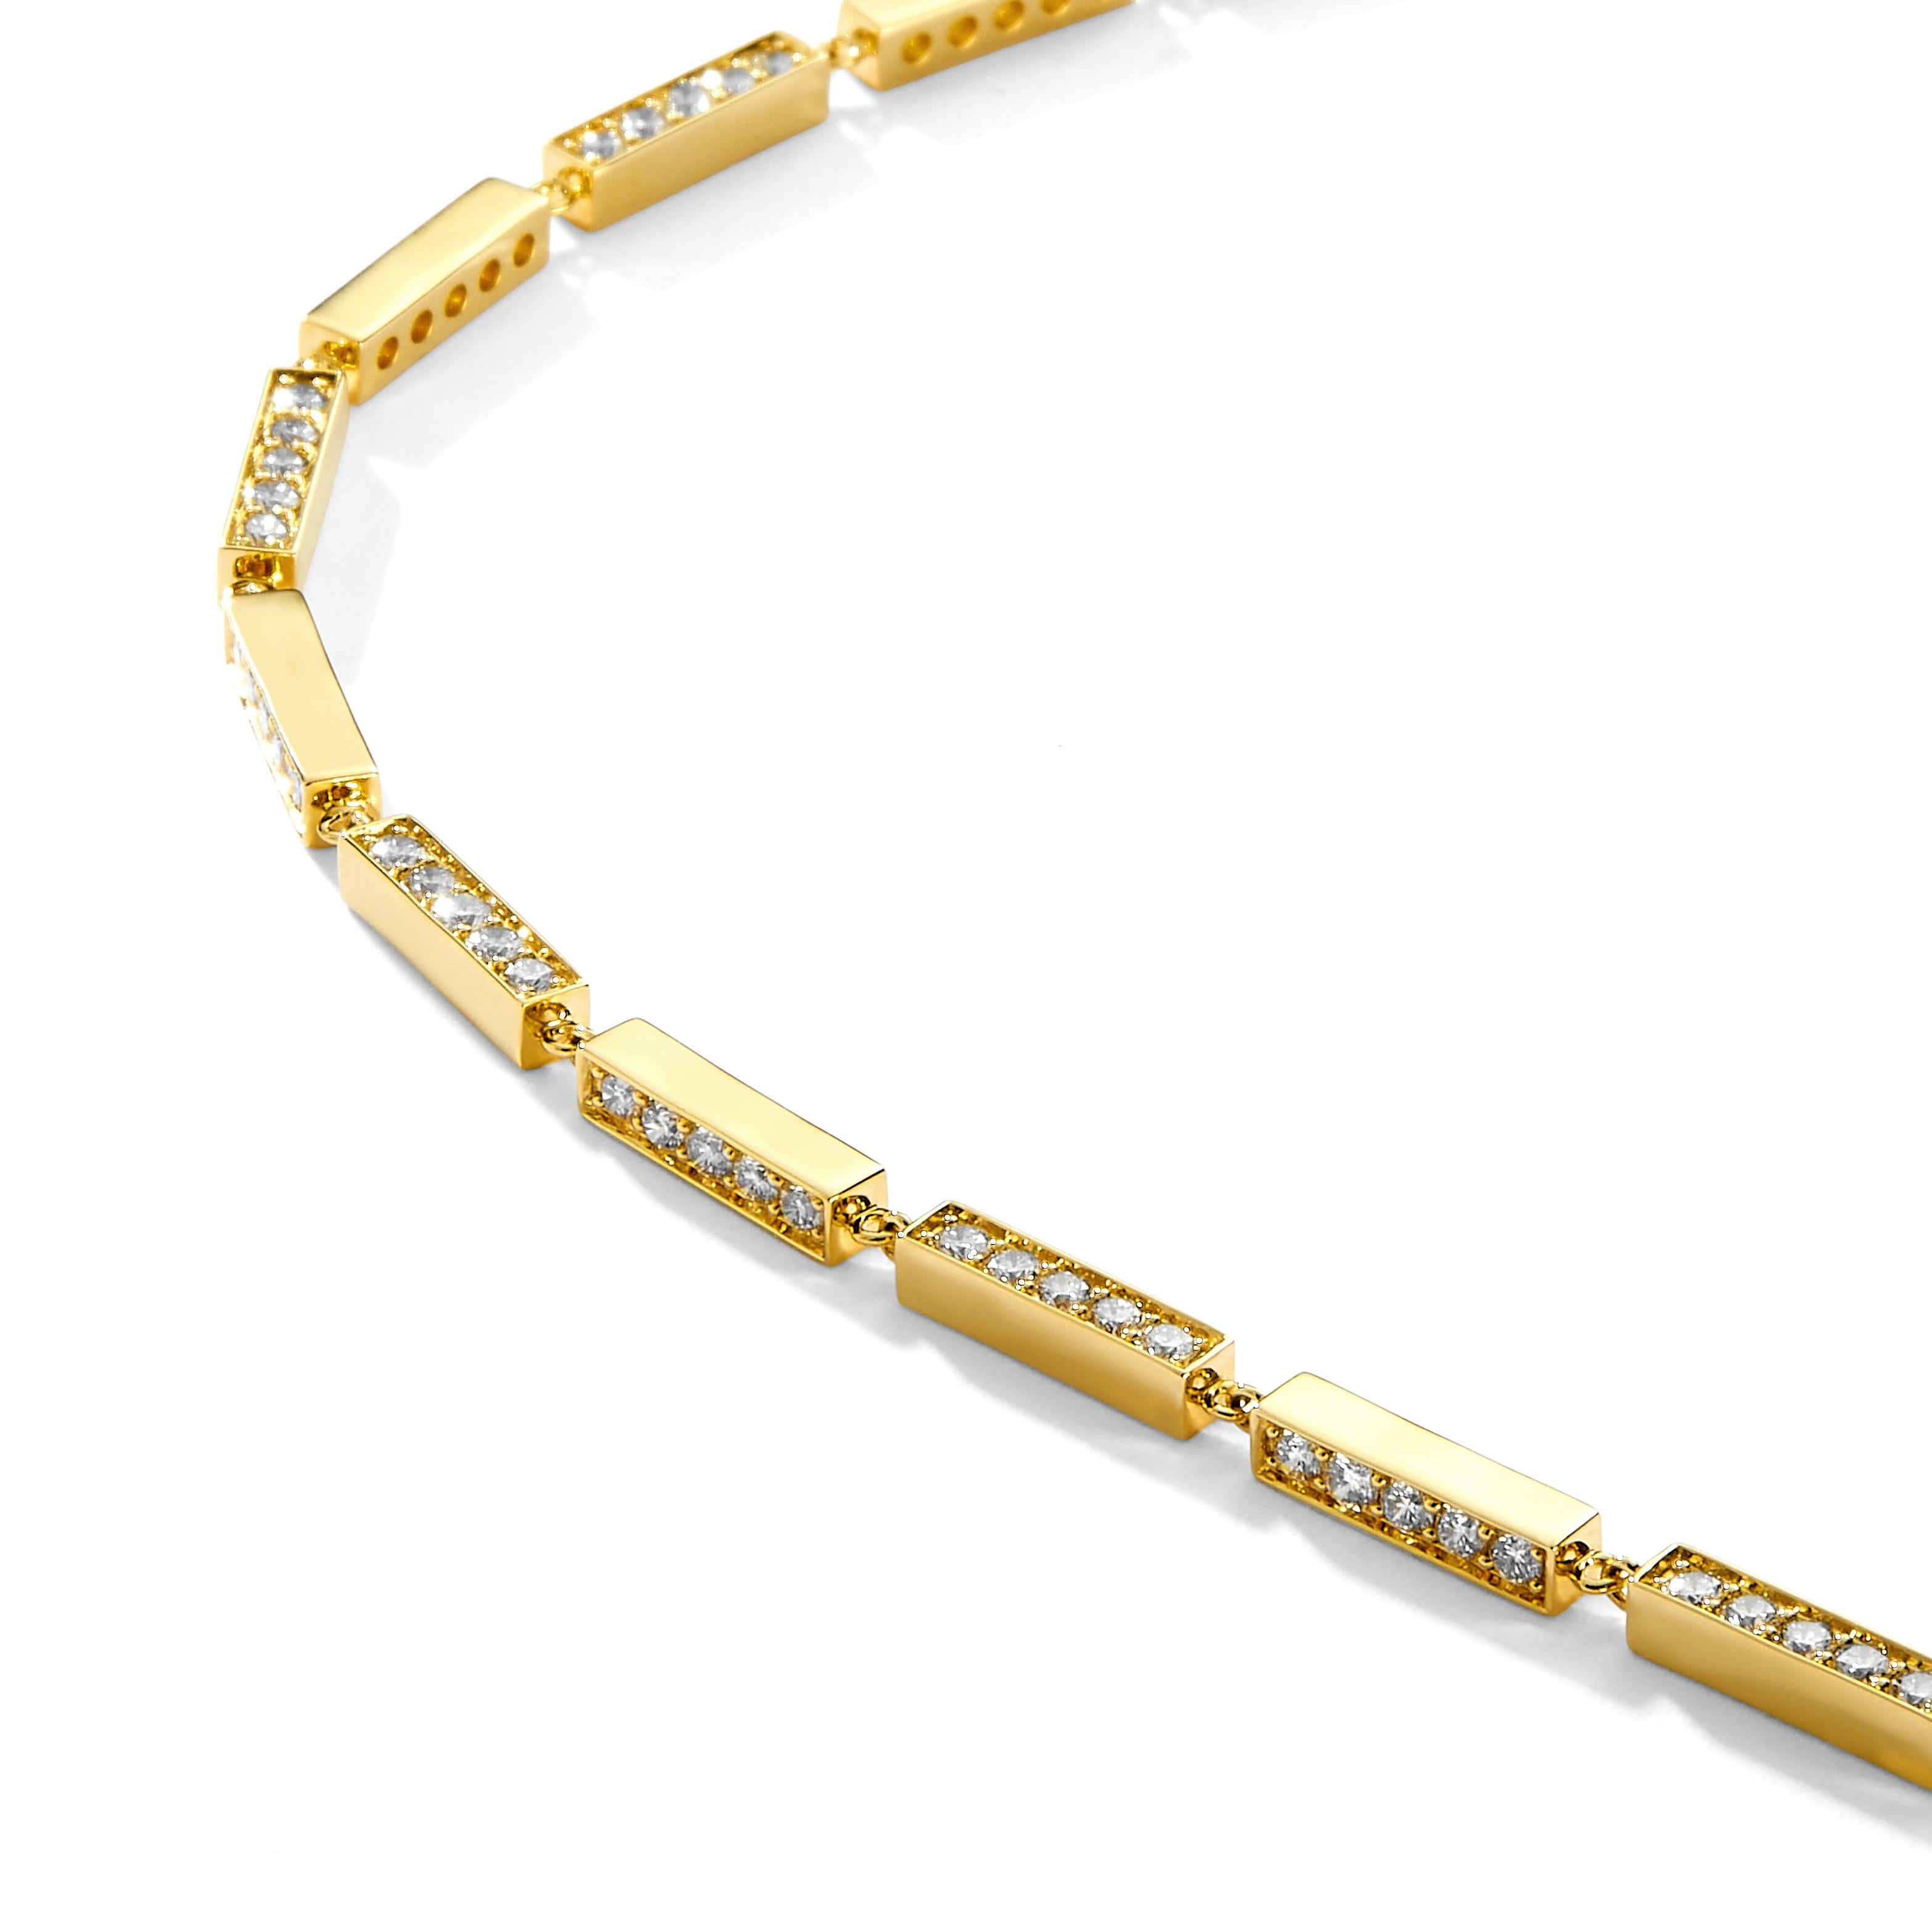 Created in 18 karat yellow gold
Diamonds 2.30 carats approx.
8 inch length with lobster clasp
Bracelet can be clasped at any length
Also available in various lengths

Effortlessly crafted from 18-karat yellow gold, this sophisticated bracelet